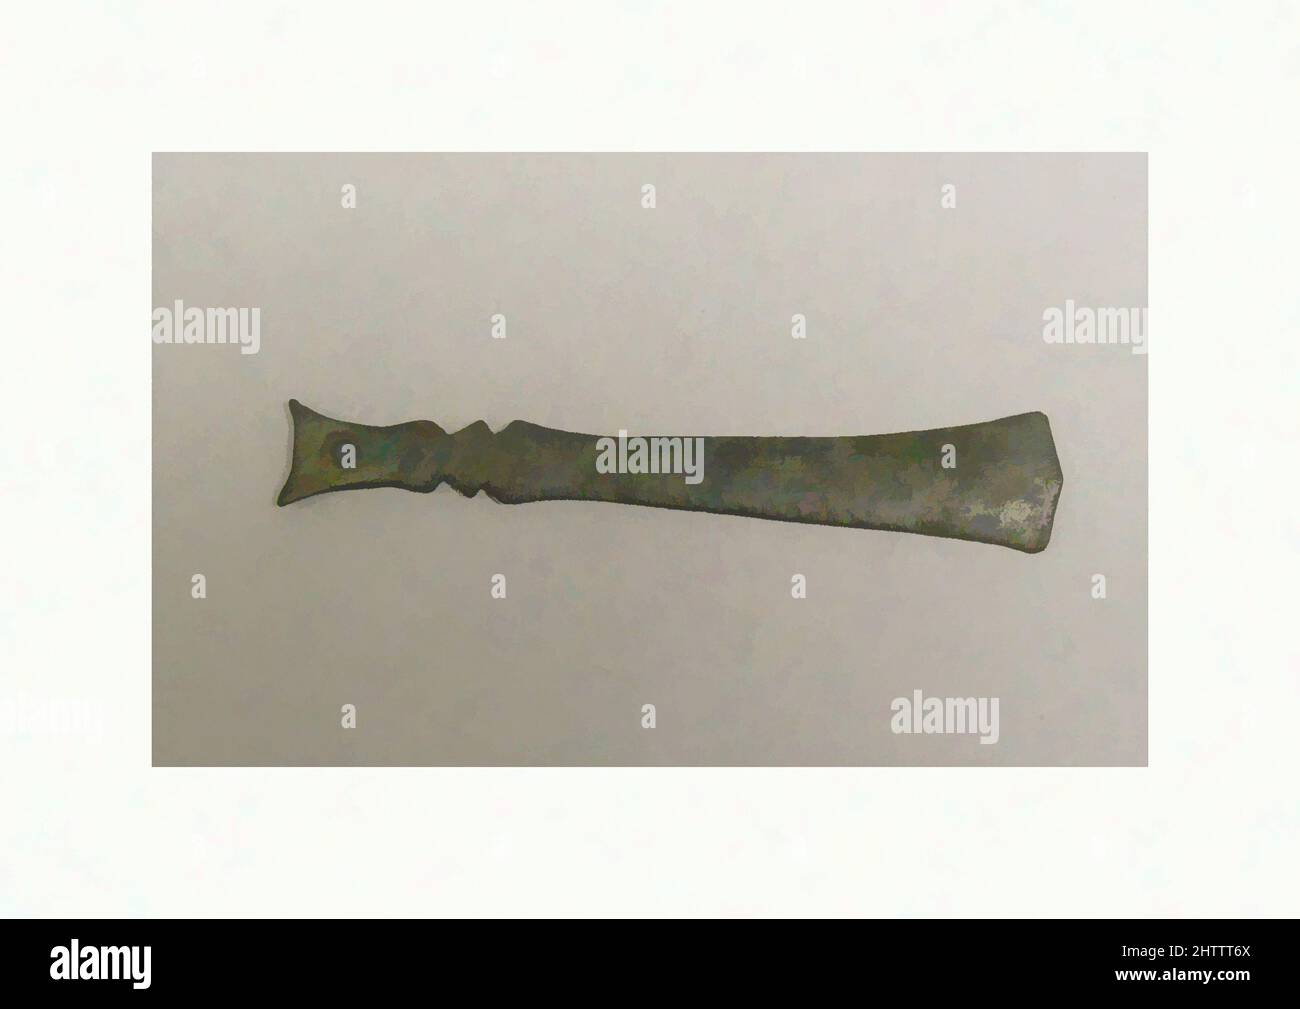 Art inspired by Sword-Shaped Lime Spatula, Bronze and Iron Age period, 500 B.C.–A.D. 300, Indonesia (Java, Lumajang, Pasiran), Bronze, H. 3 9/16 in. (9 cm); W. 11/16 in. (1.7 cm), Metalwork, Classic works modernized by Artotop with a splash of modernity. Shapes, color and value, eye-catching visual impact on art. Emotions through freedom of artworks in a contemporary way. A timeless message pursuing a wildly creative new direction. Artists turning to the digital medium and creating the Artotop NFT Stock Photo